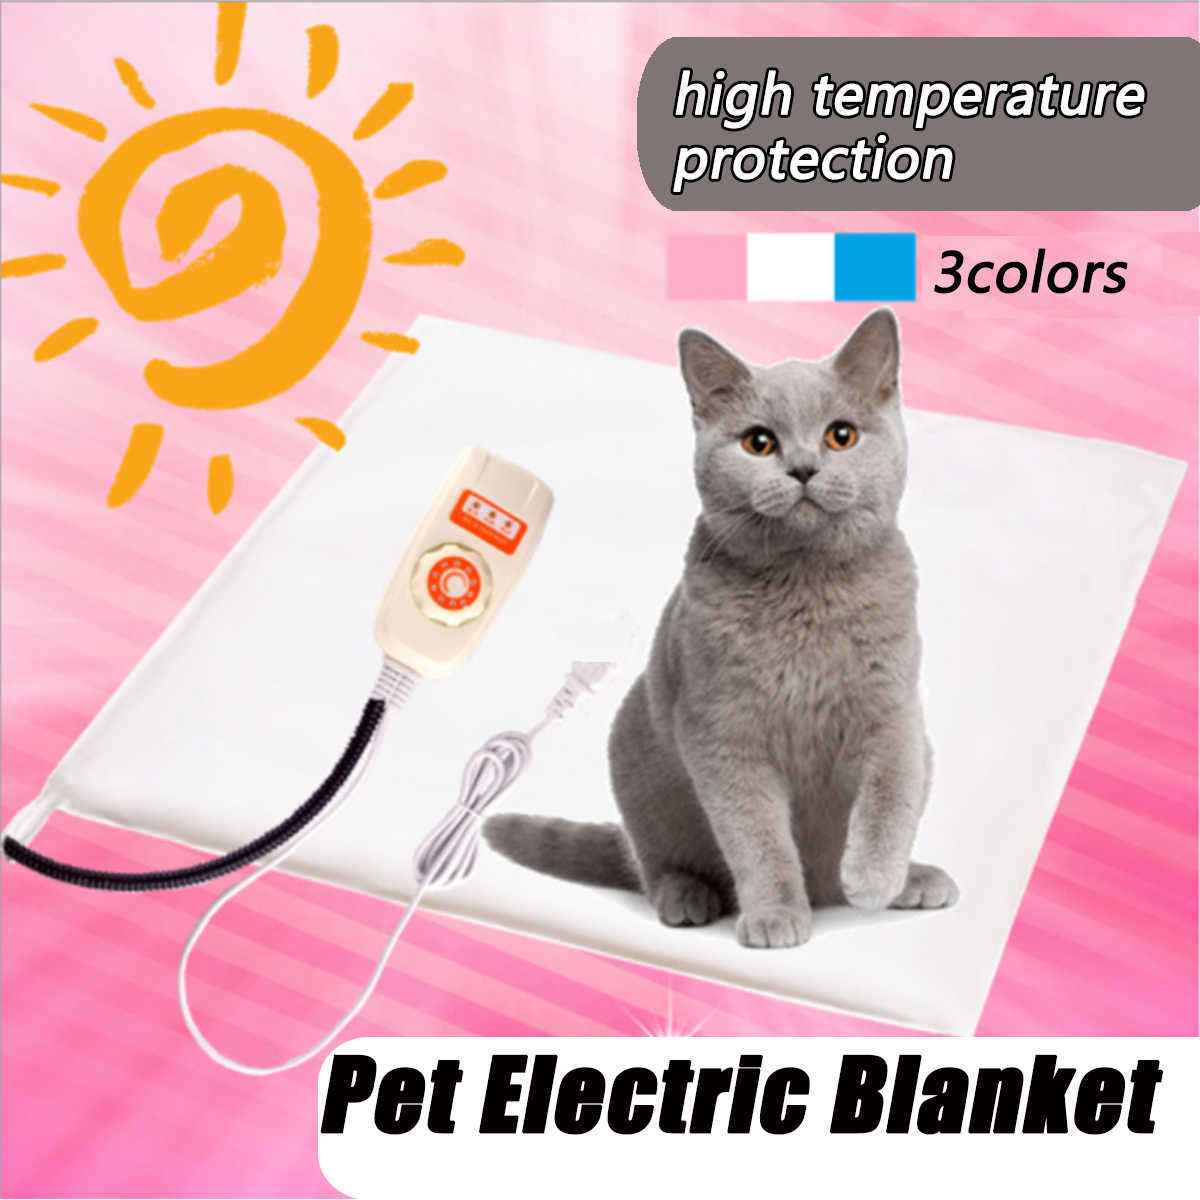 10-Stalls-Electric-Pet-Puppy-Pad-Heated-Blanket-Waterproof-Scratch-Prevention-Warmer-Heating-Mat-1407409-3